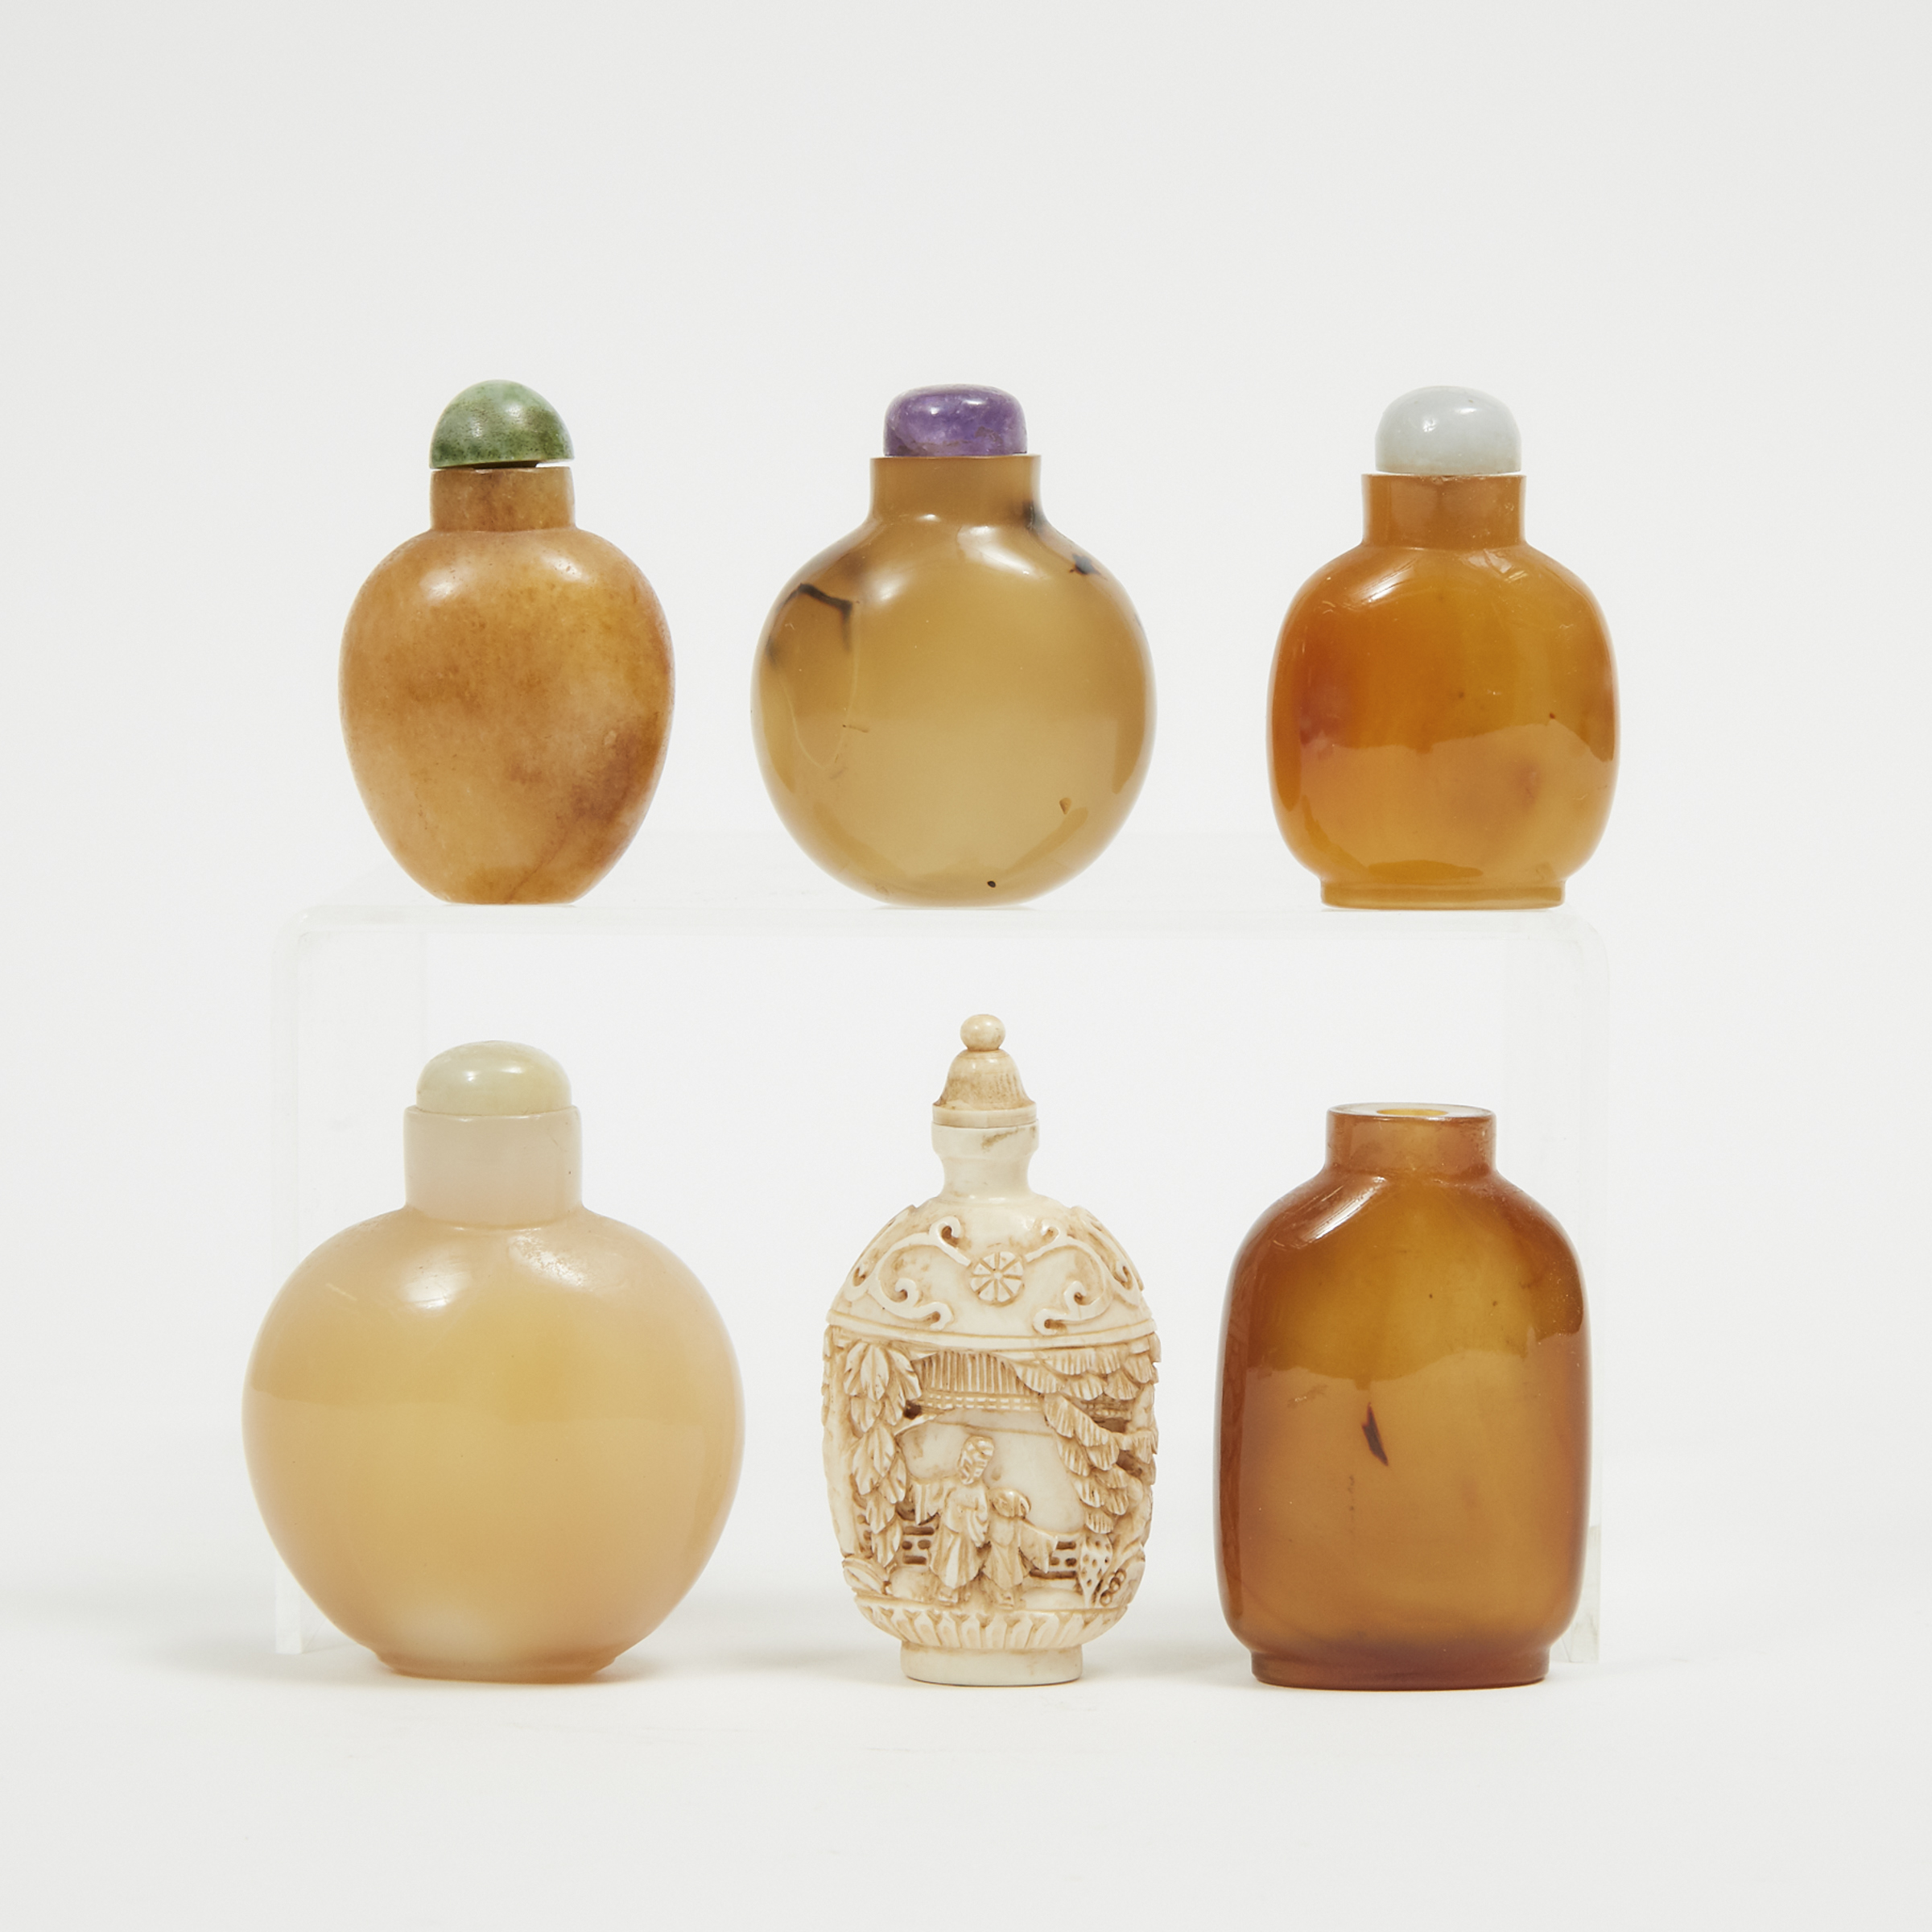 A Group of Six Snuff Bottles, 19th Century